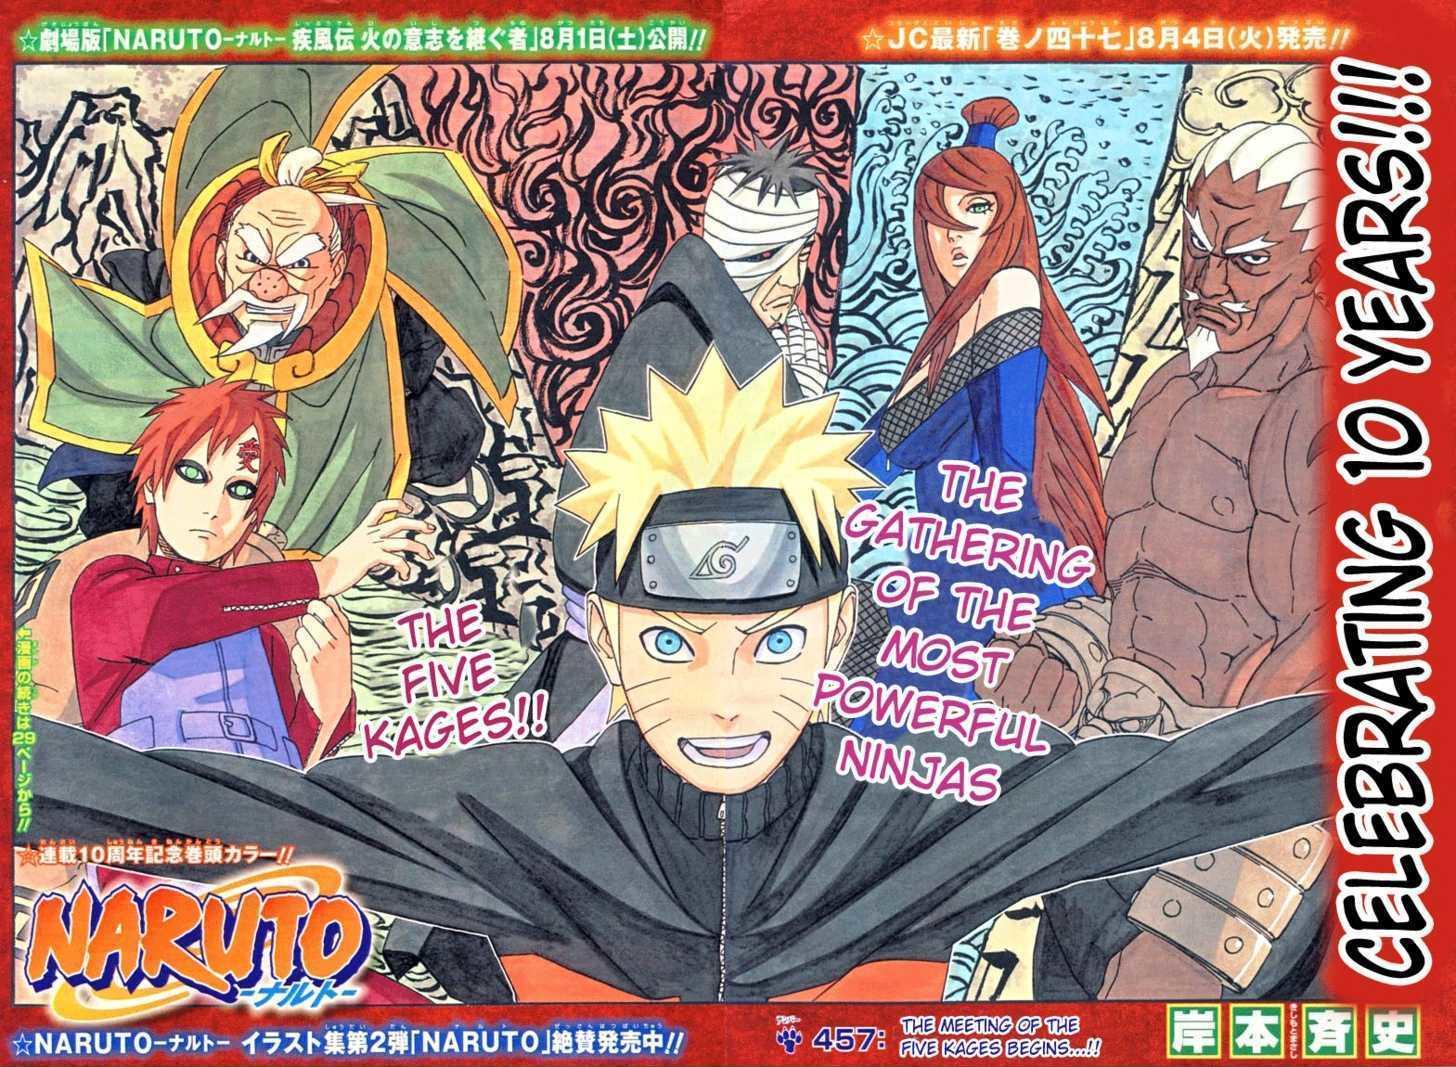 Vol.49 Chapter 457 – The Five Kage Summit, Commences…!! | 1 page